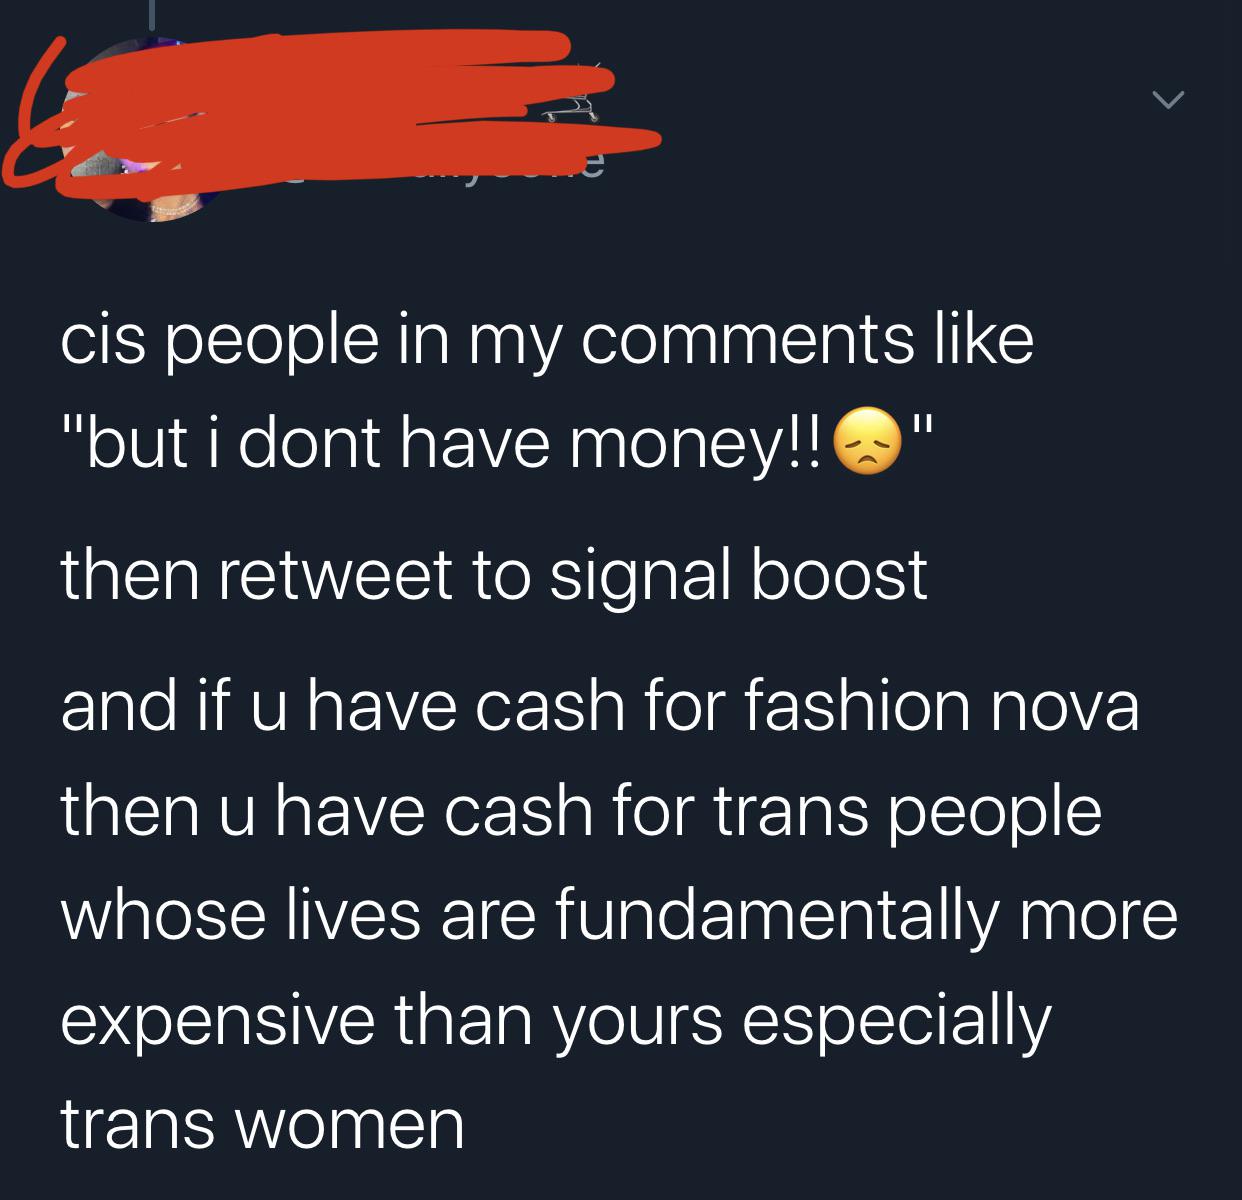 atmosphere - cis people in my "but i dont have money!!" then retweet to signal boost and if u have cash for fashion nova then u have cash for trans people whose lives are fundamentally more expensive than yours especially trans women